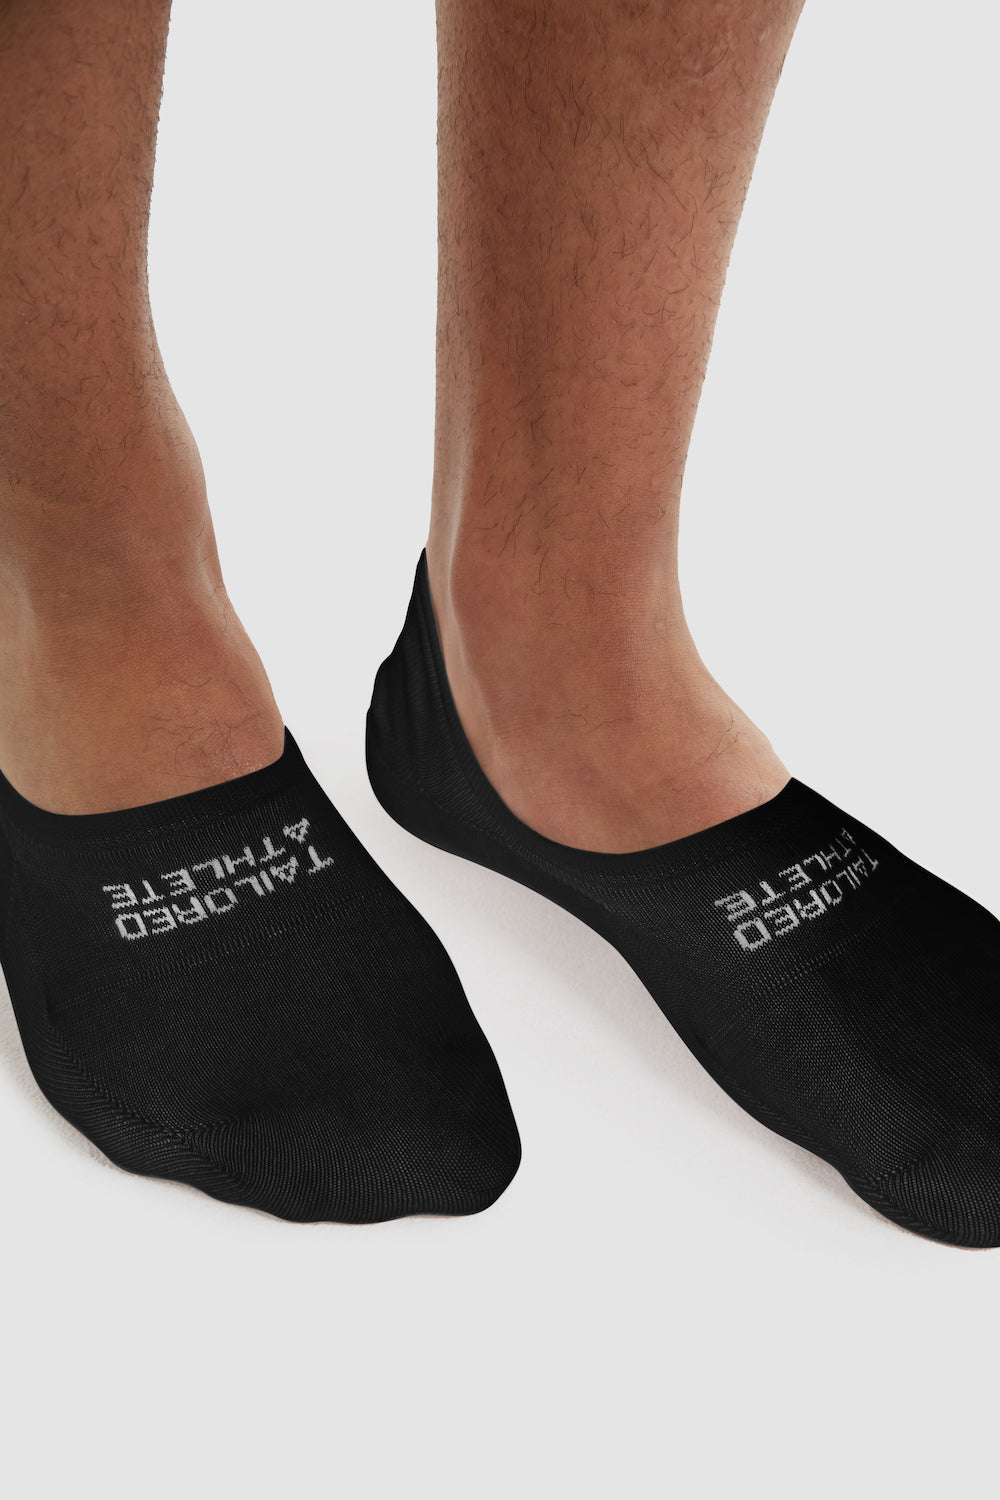 3 Pack No Show Socks in Black - TAILORED ATHLETE - ROW